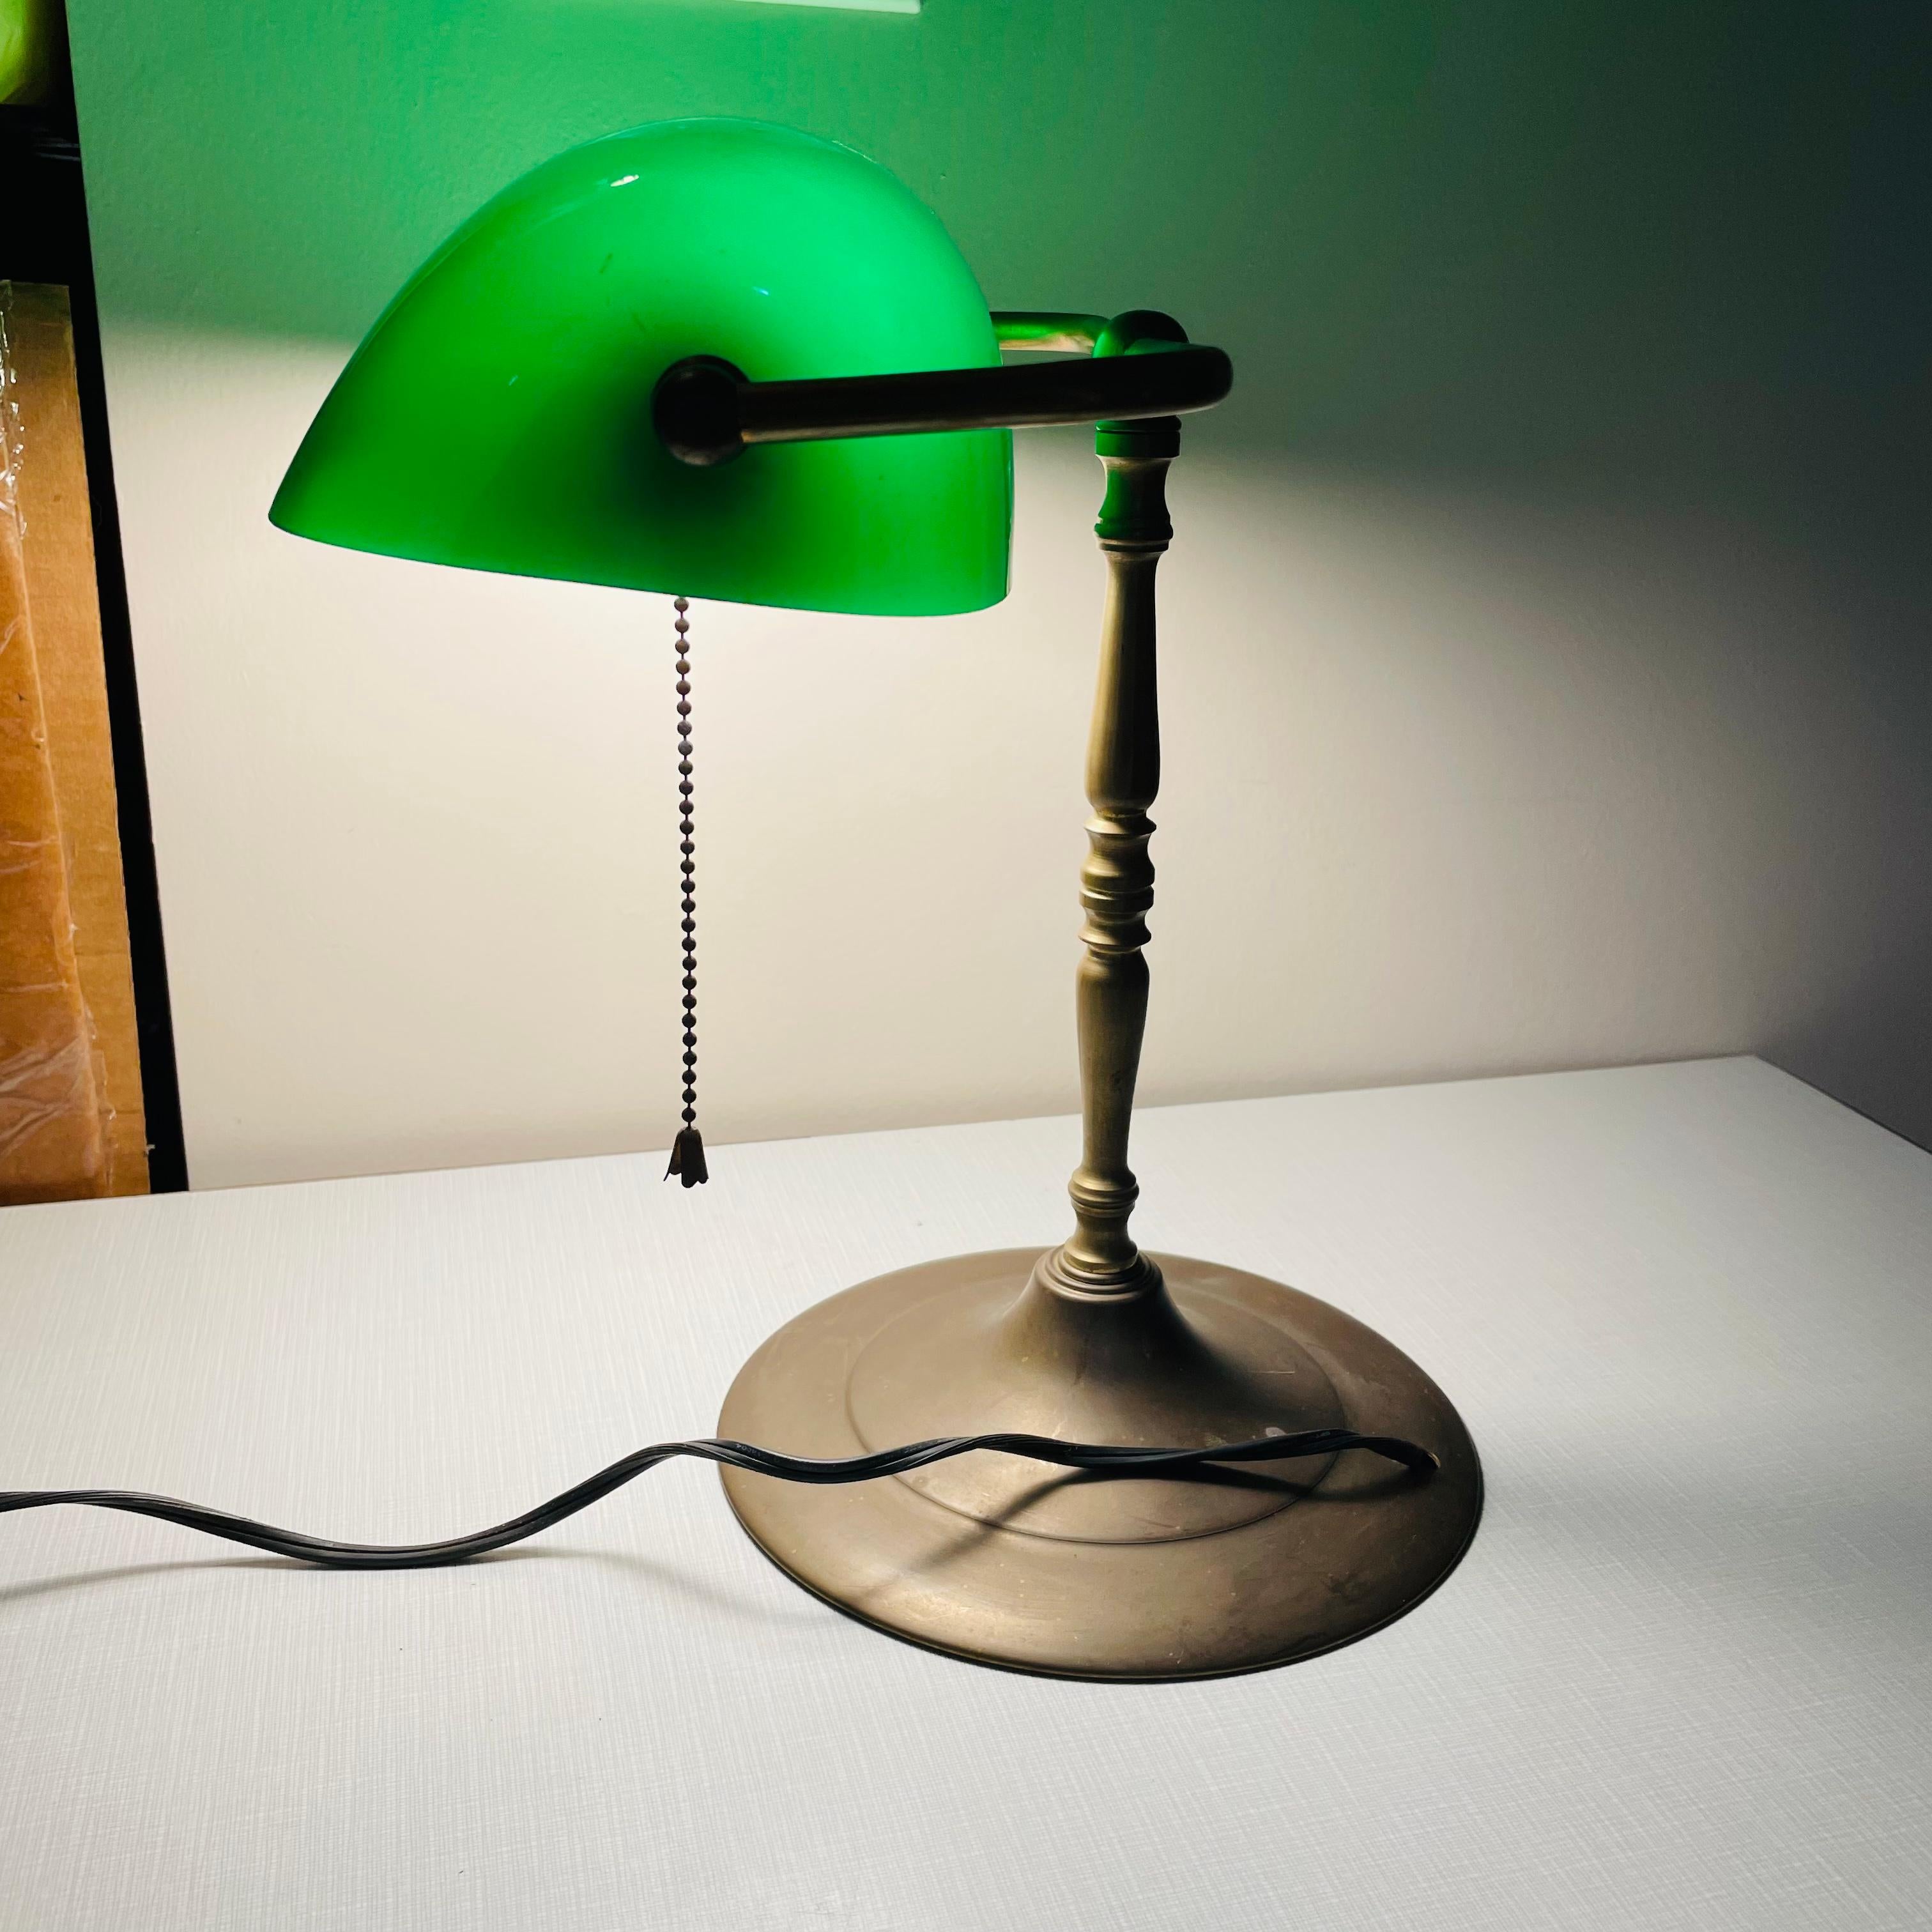 Art Deco 1940s Brass Banker Lamp with Green Glass Shade